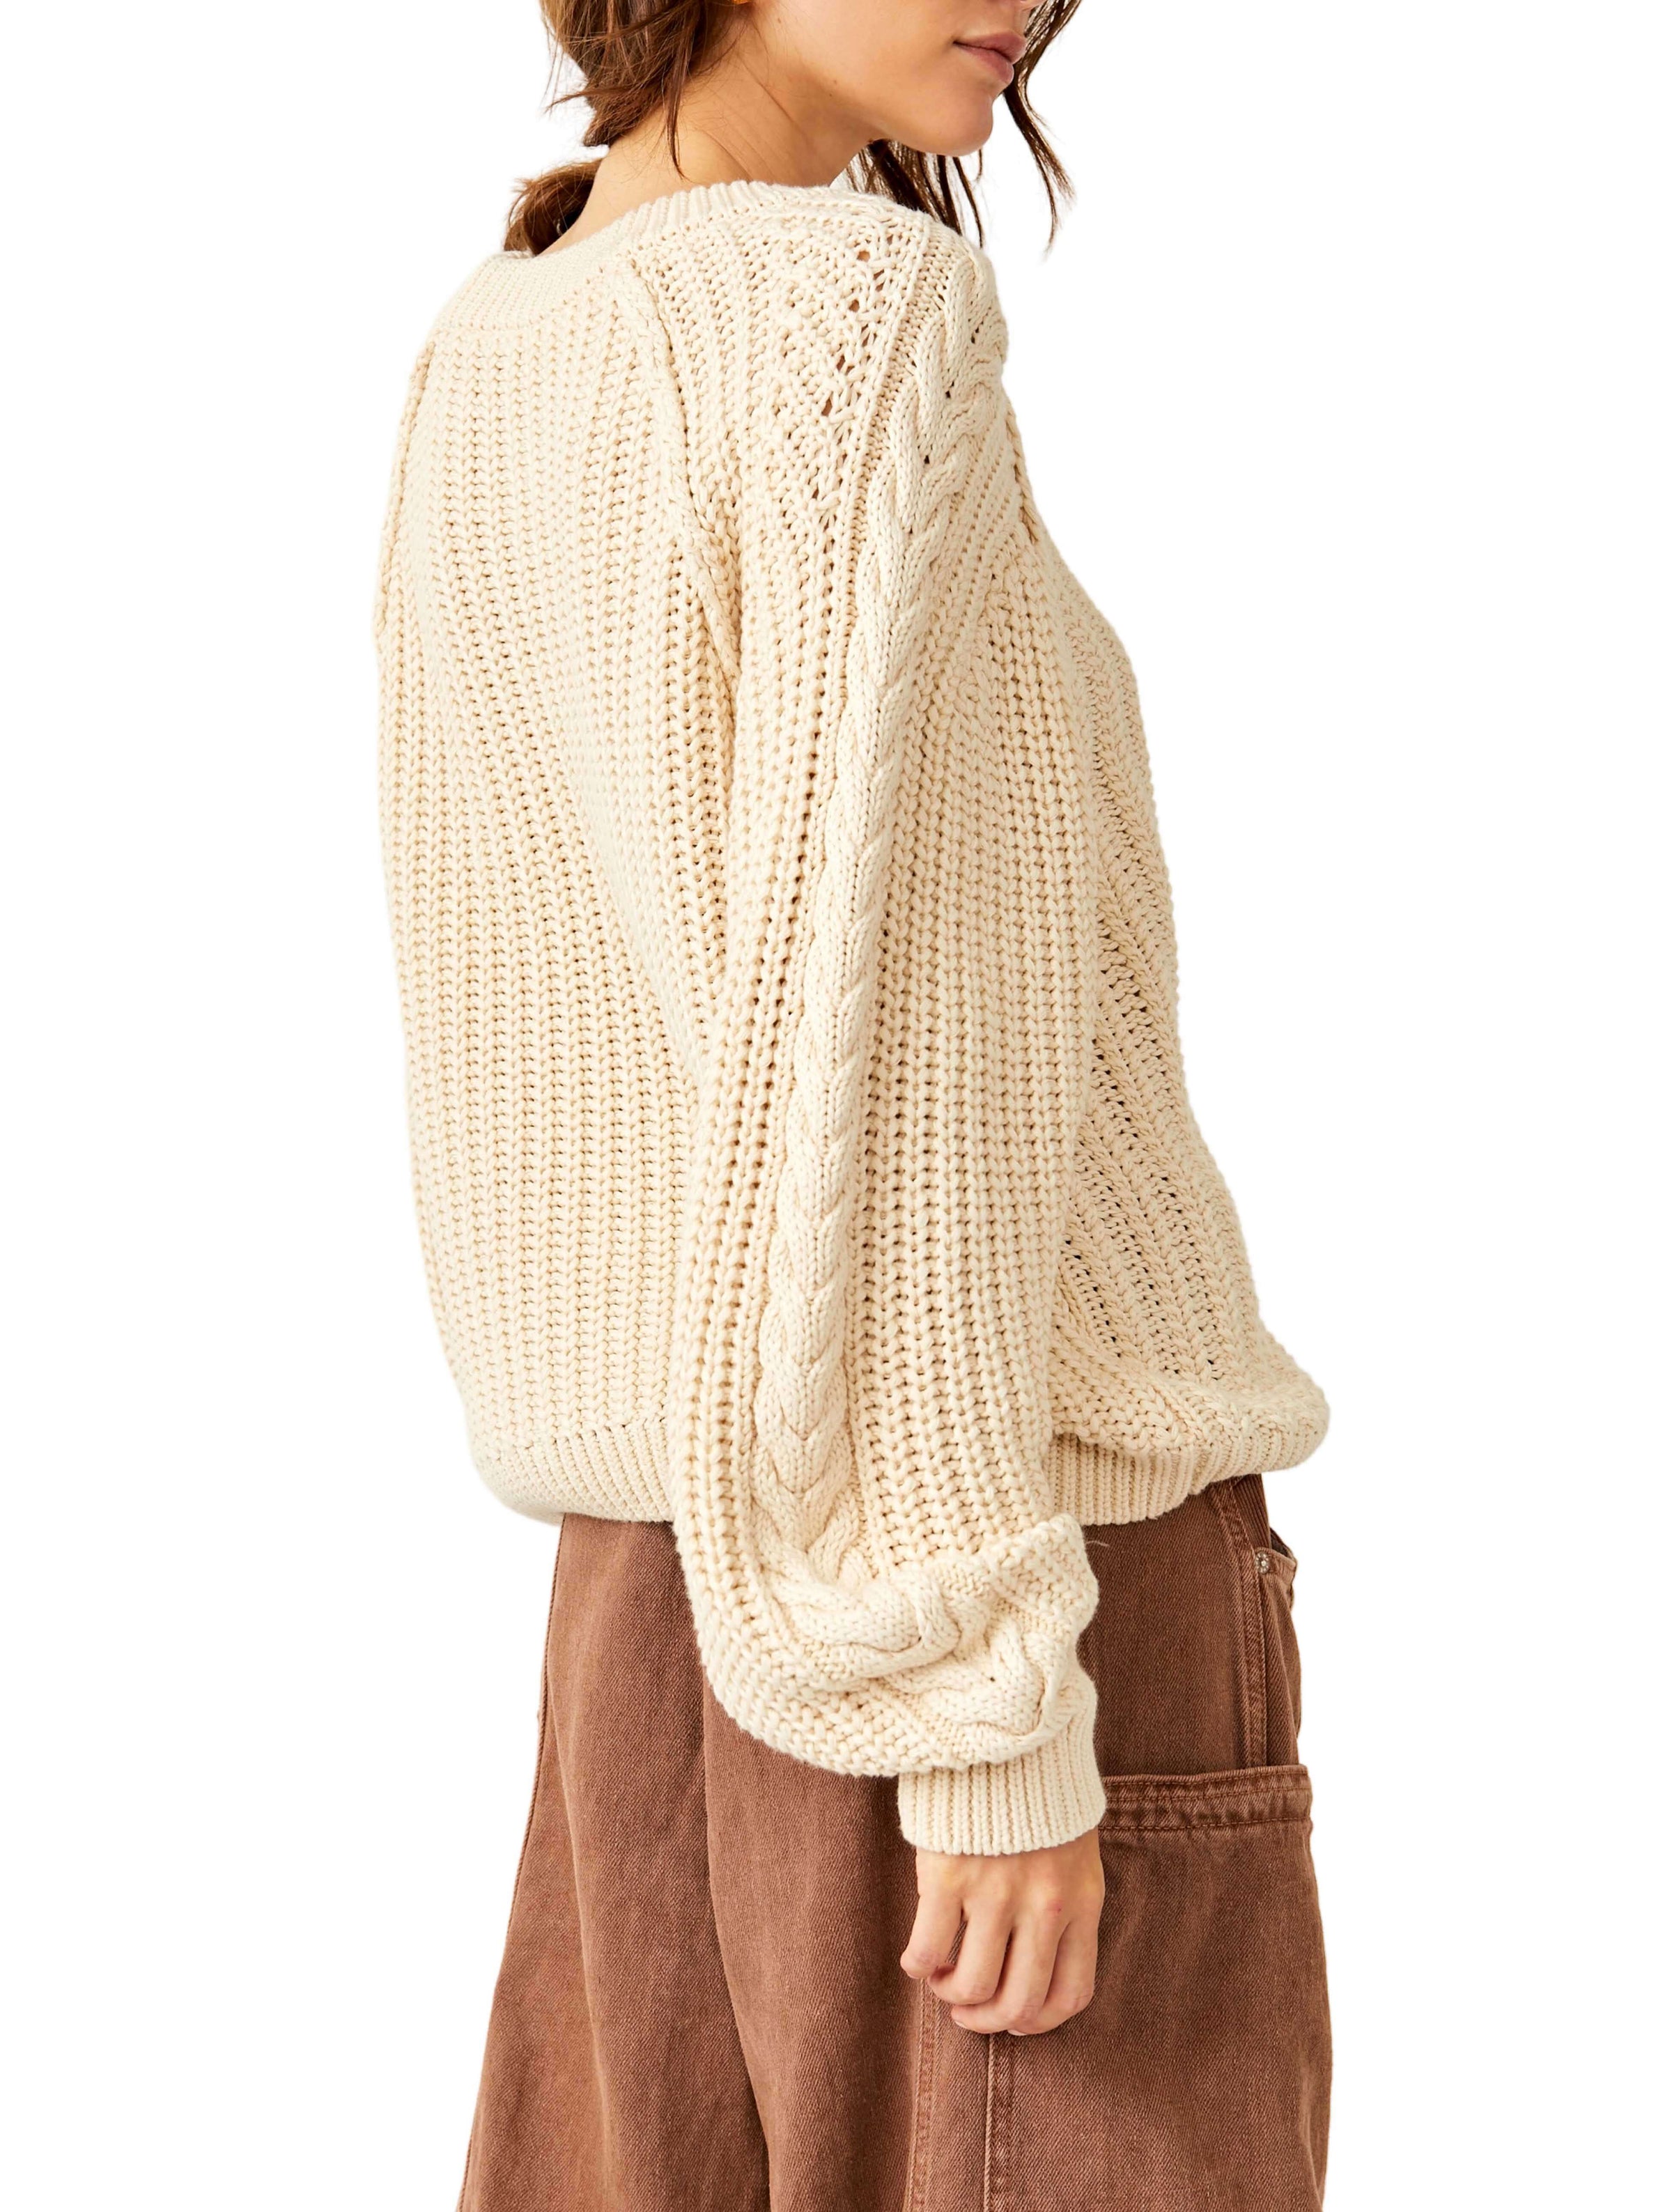 Free People Frankie Cable Knit Sweater in Ivory